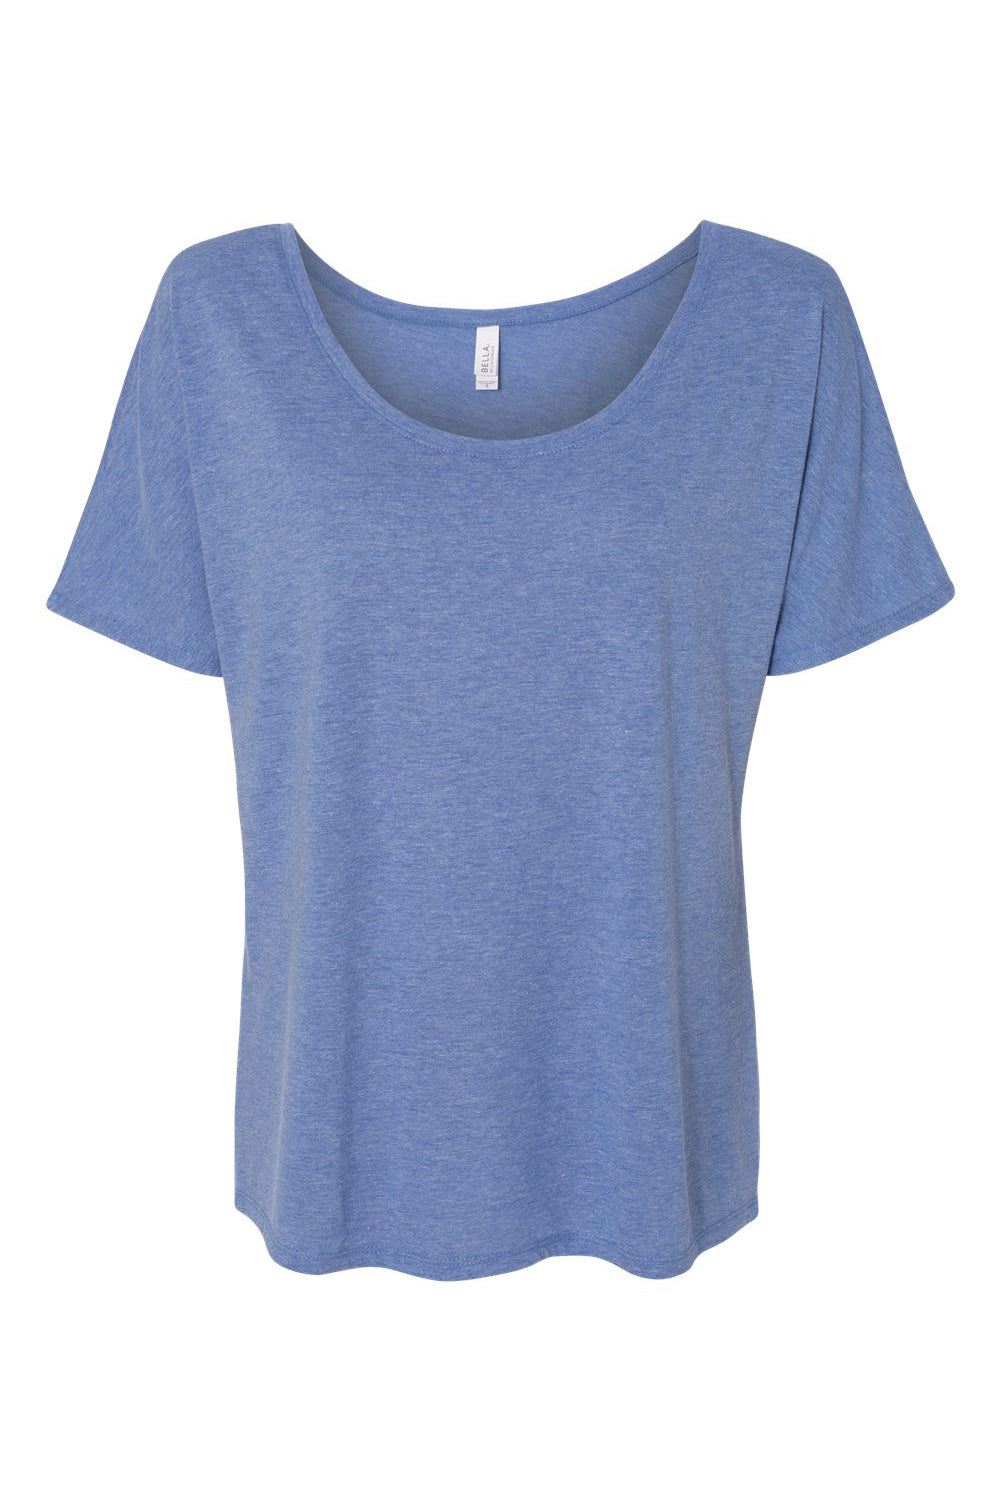 Bella + Canvas BC8816/8816 Womens Slouchy Short Sleeve Wide Neck T-Shirt Blue Triblend Flat Front